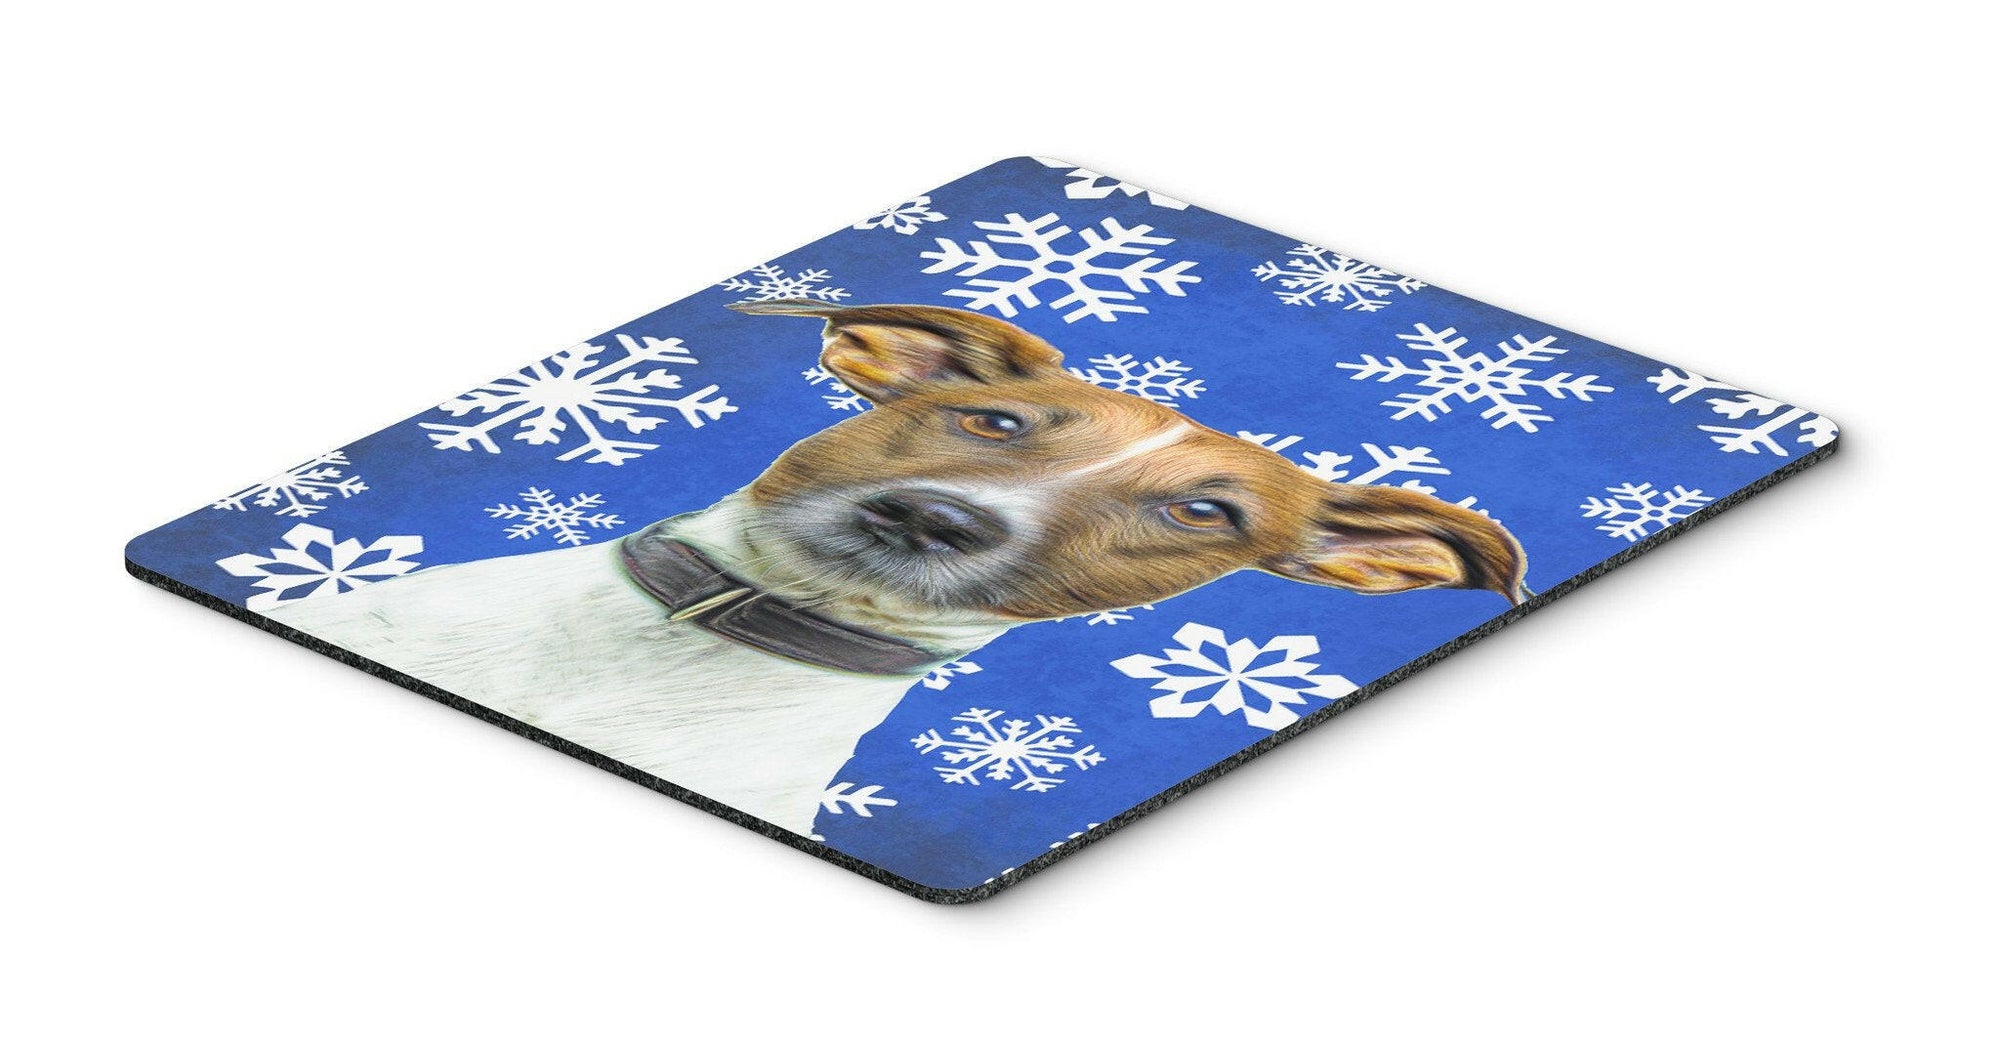 Winter Snowflakes Holiday Jack Russell Terrier Mouse Pad, Hot Pad or Trivet KJ1176MP by Caroline's Treasures